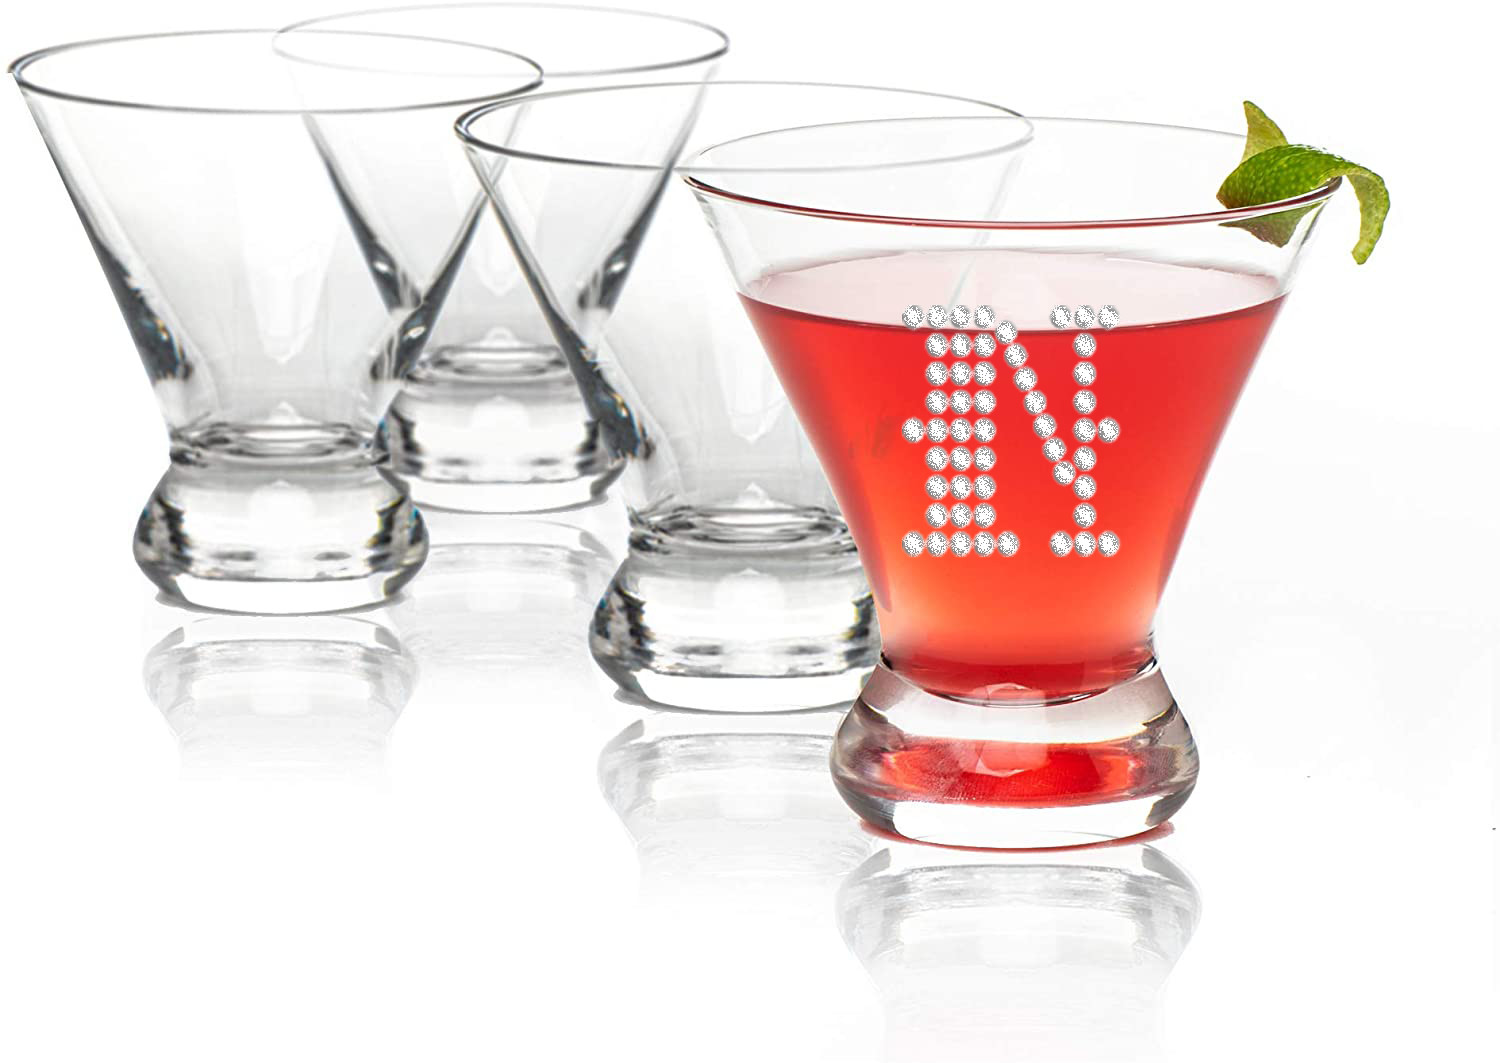 Personalized Stemless Martini Glasses Set of 4 - Home Wet Bar